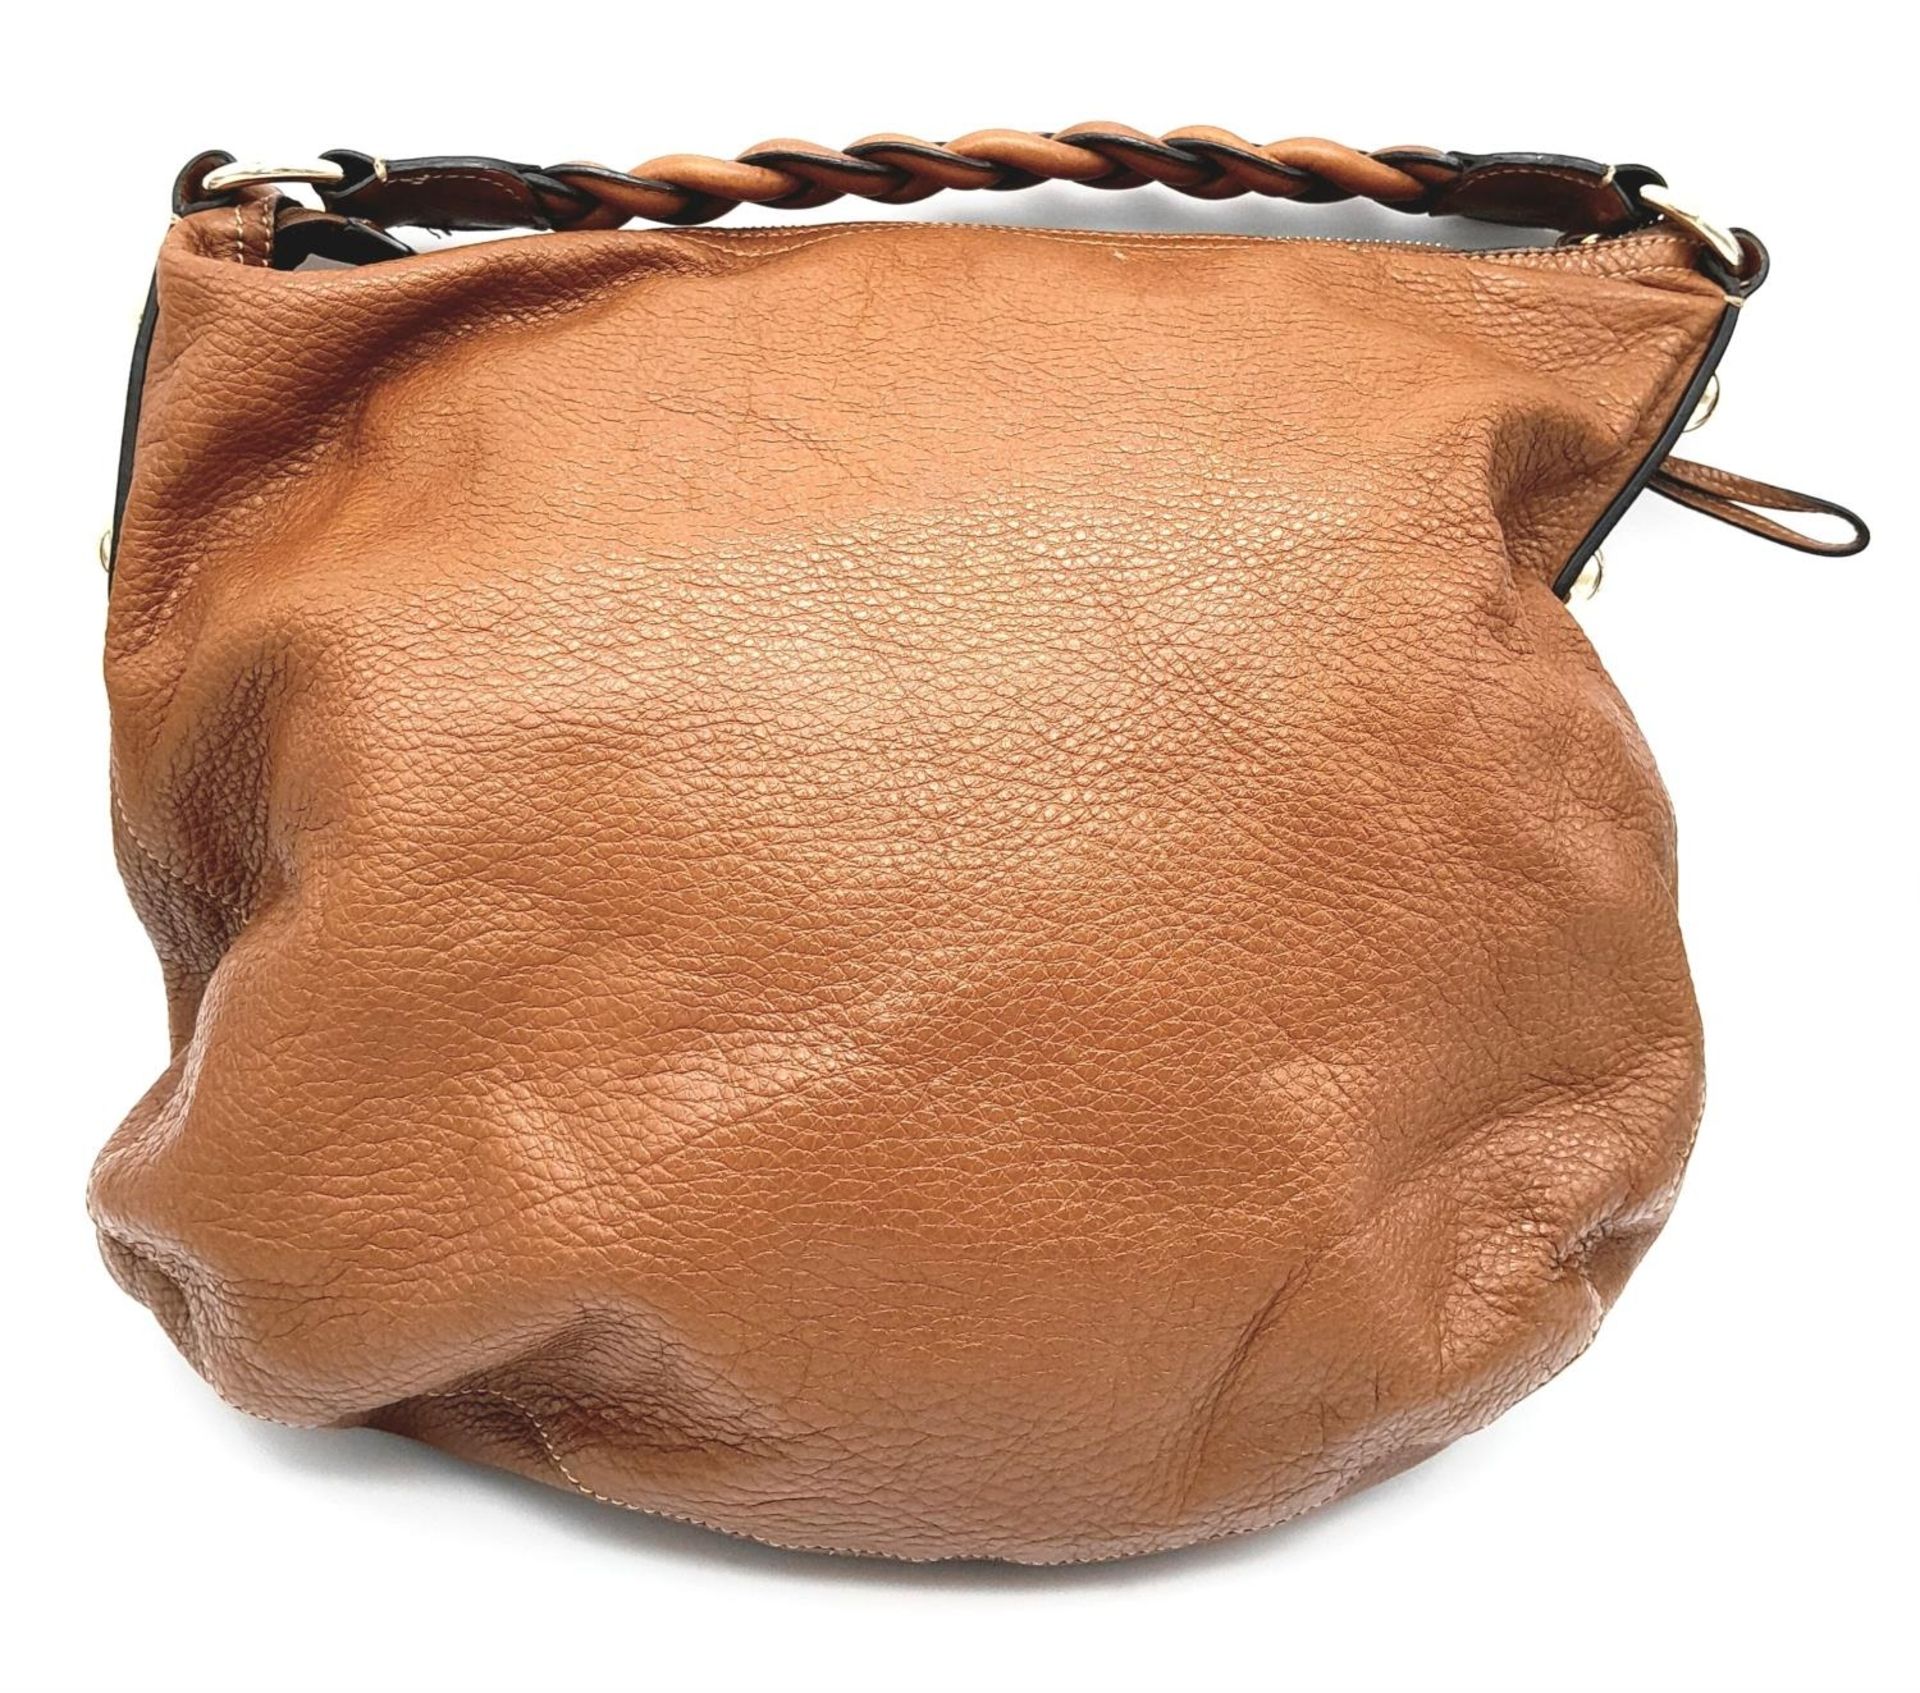 A Mulberry Tan Daria Hobo Bag. Leather exterior with gold-toned hardware, braided strap and zip - Bild 5 aus 8